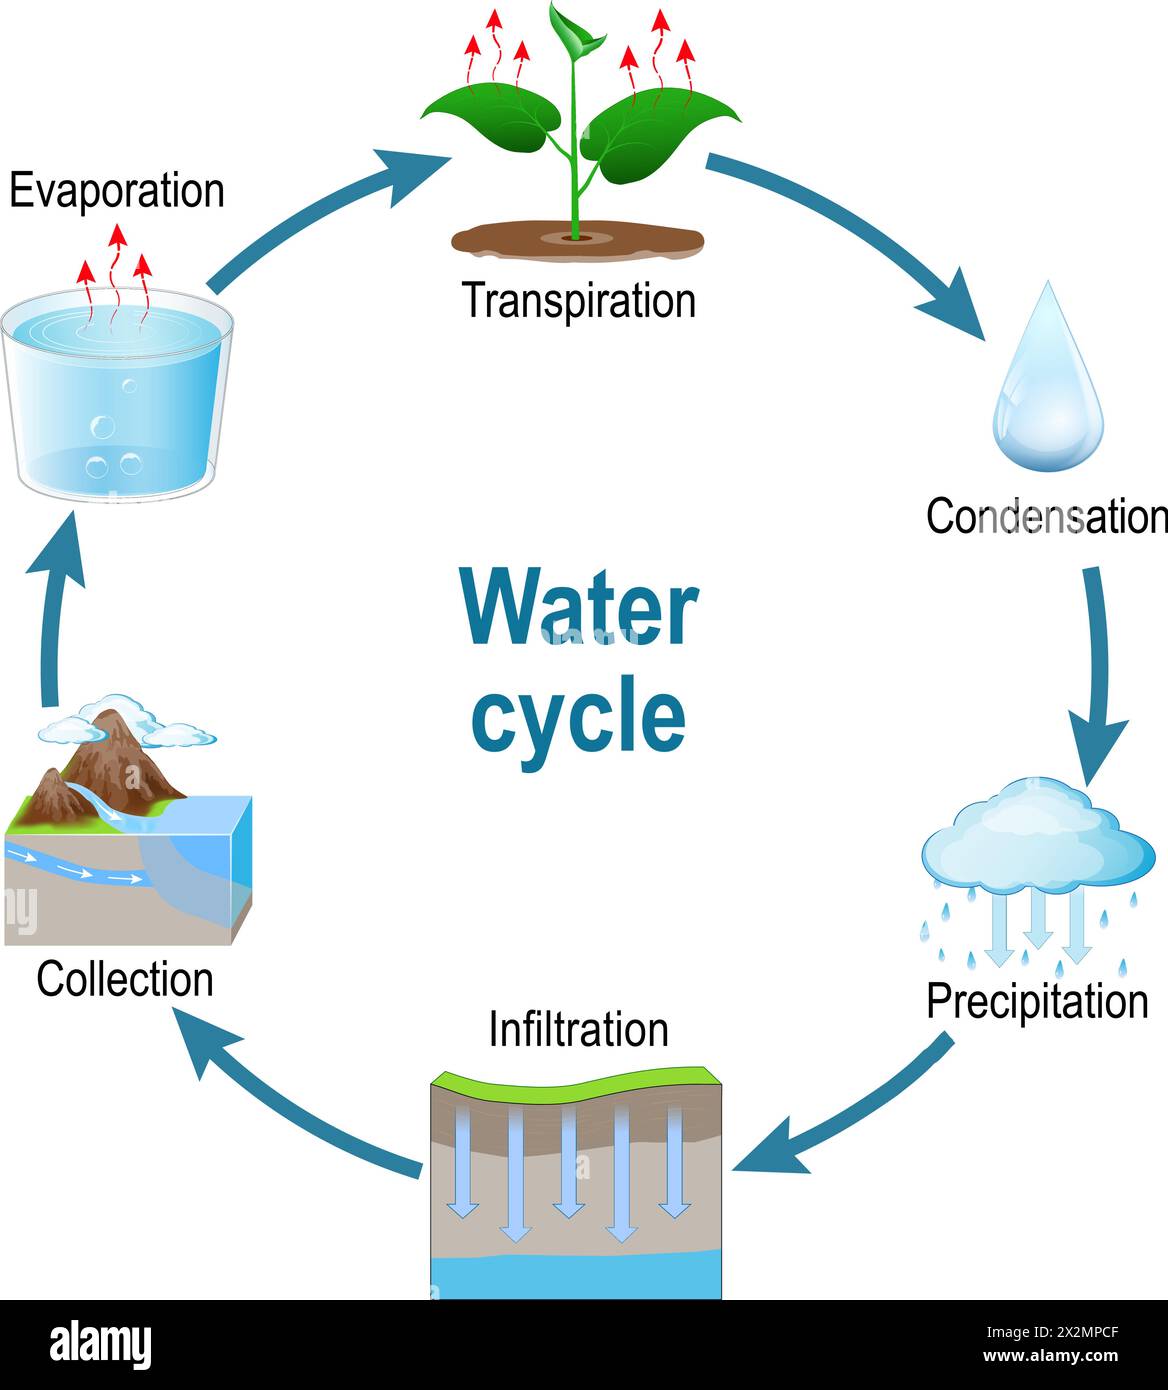 Water cycle. Schematic diagram representation of the water cycle in nature. Circulation and condensation. the hydrological cycle process visually for Stock Vector